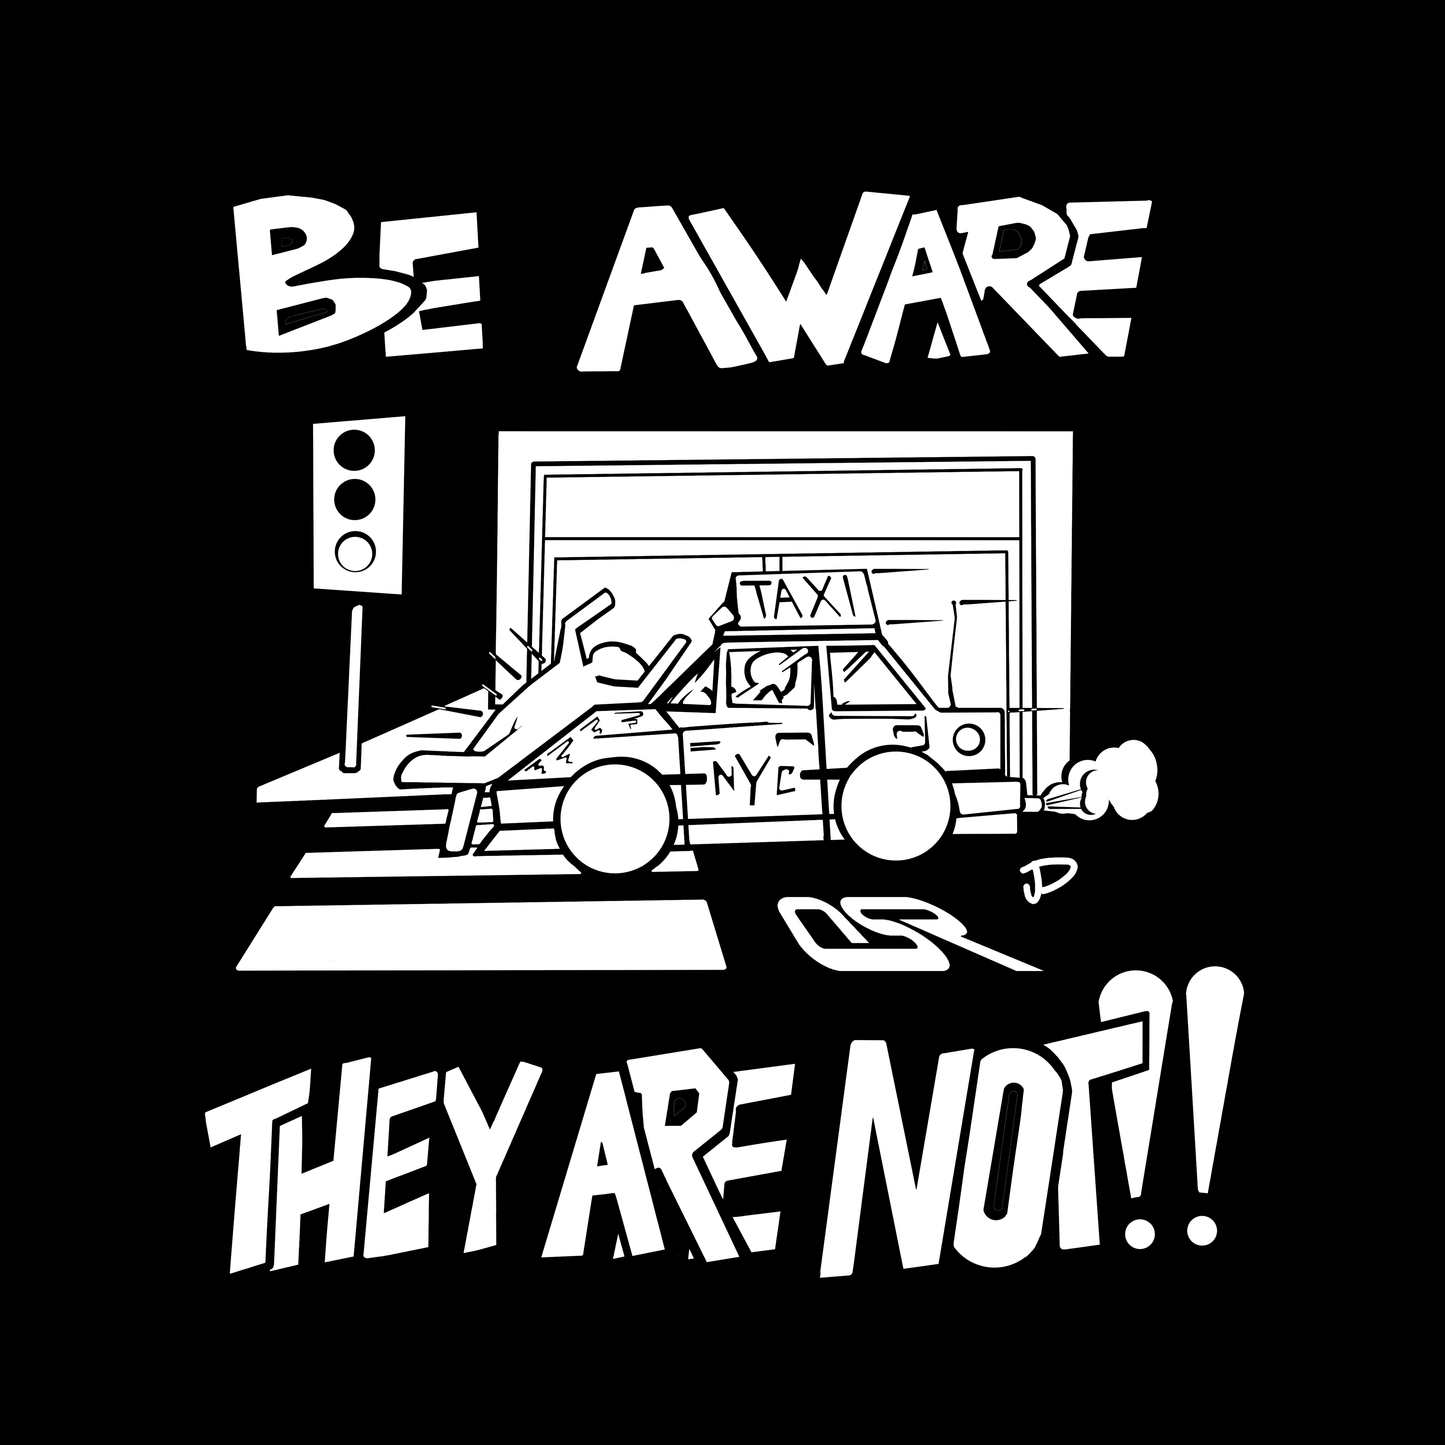 "Be Aware That They Are Not!" T-Shirt